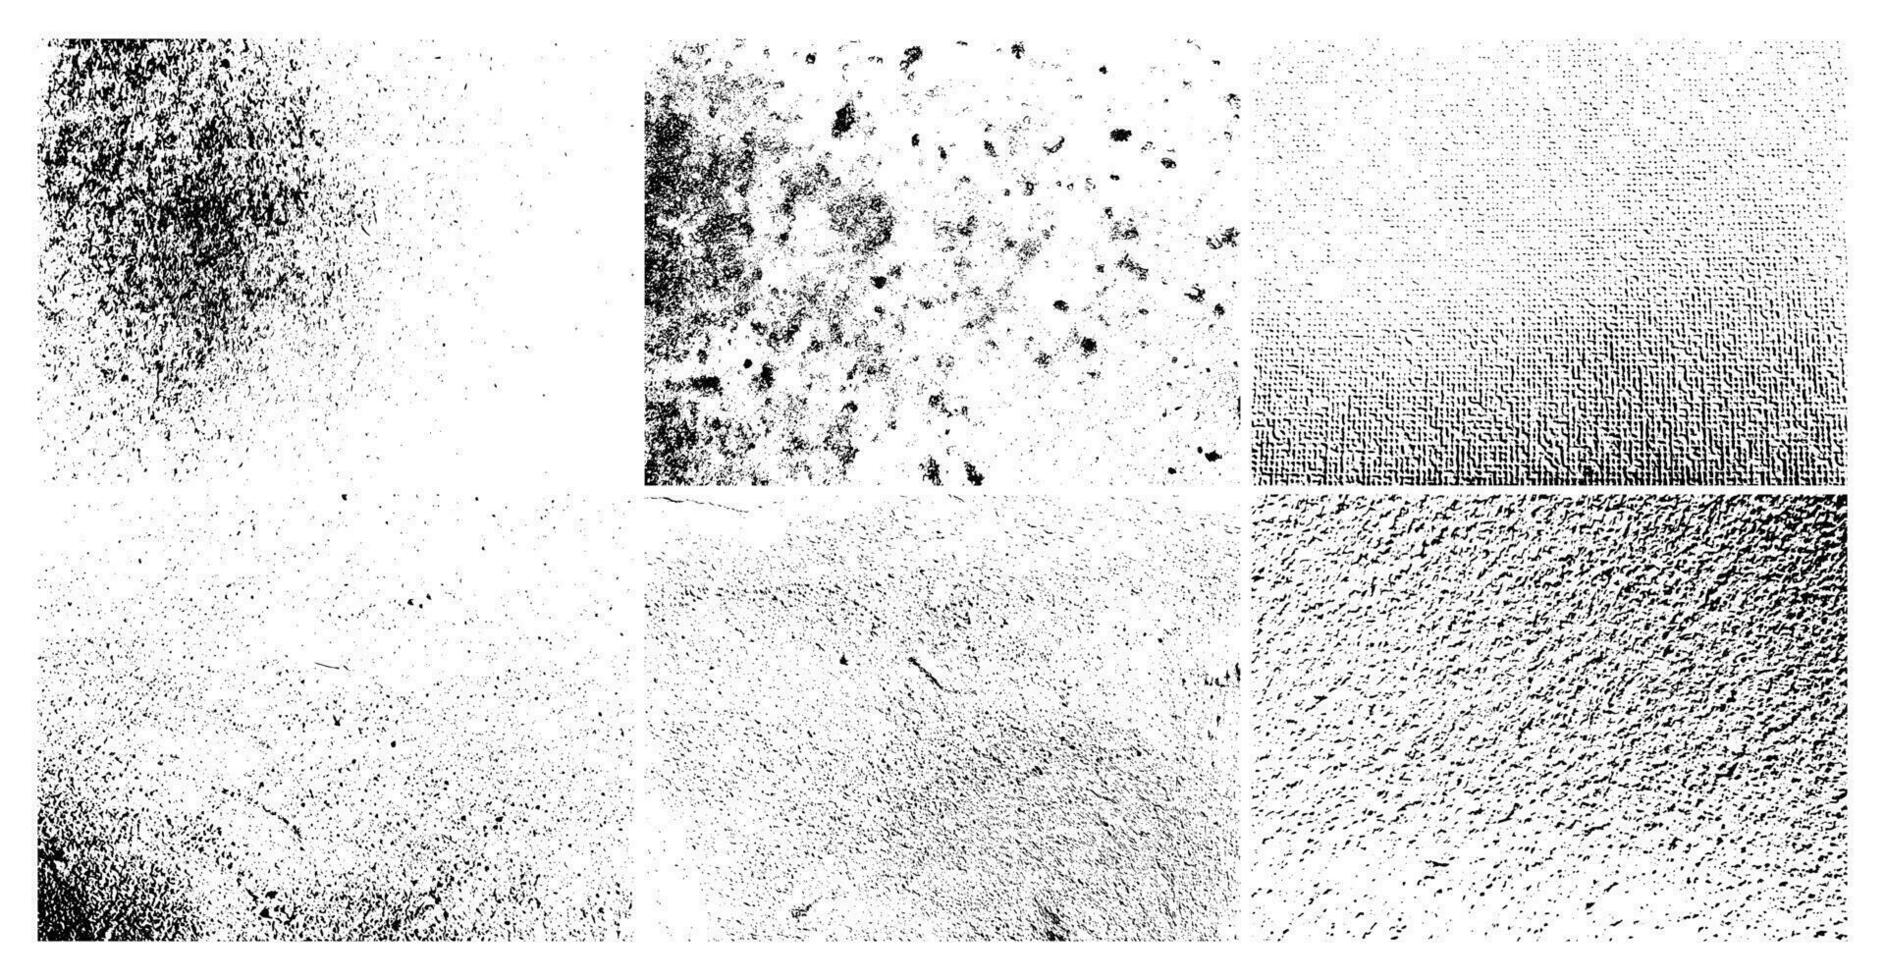 Grunge grainy dirty texture. Set of six abstract urban distress overlay backgrounds. Vector illustration